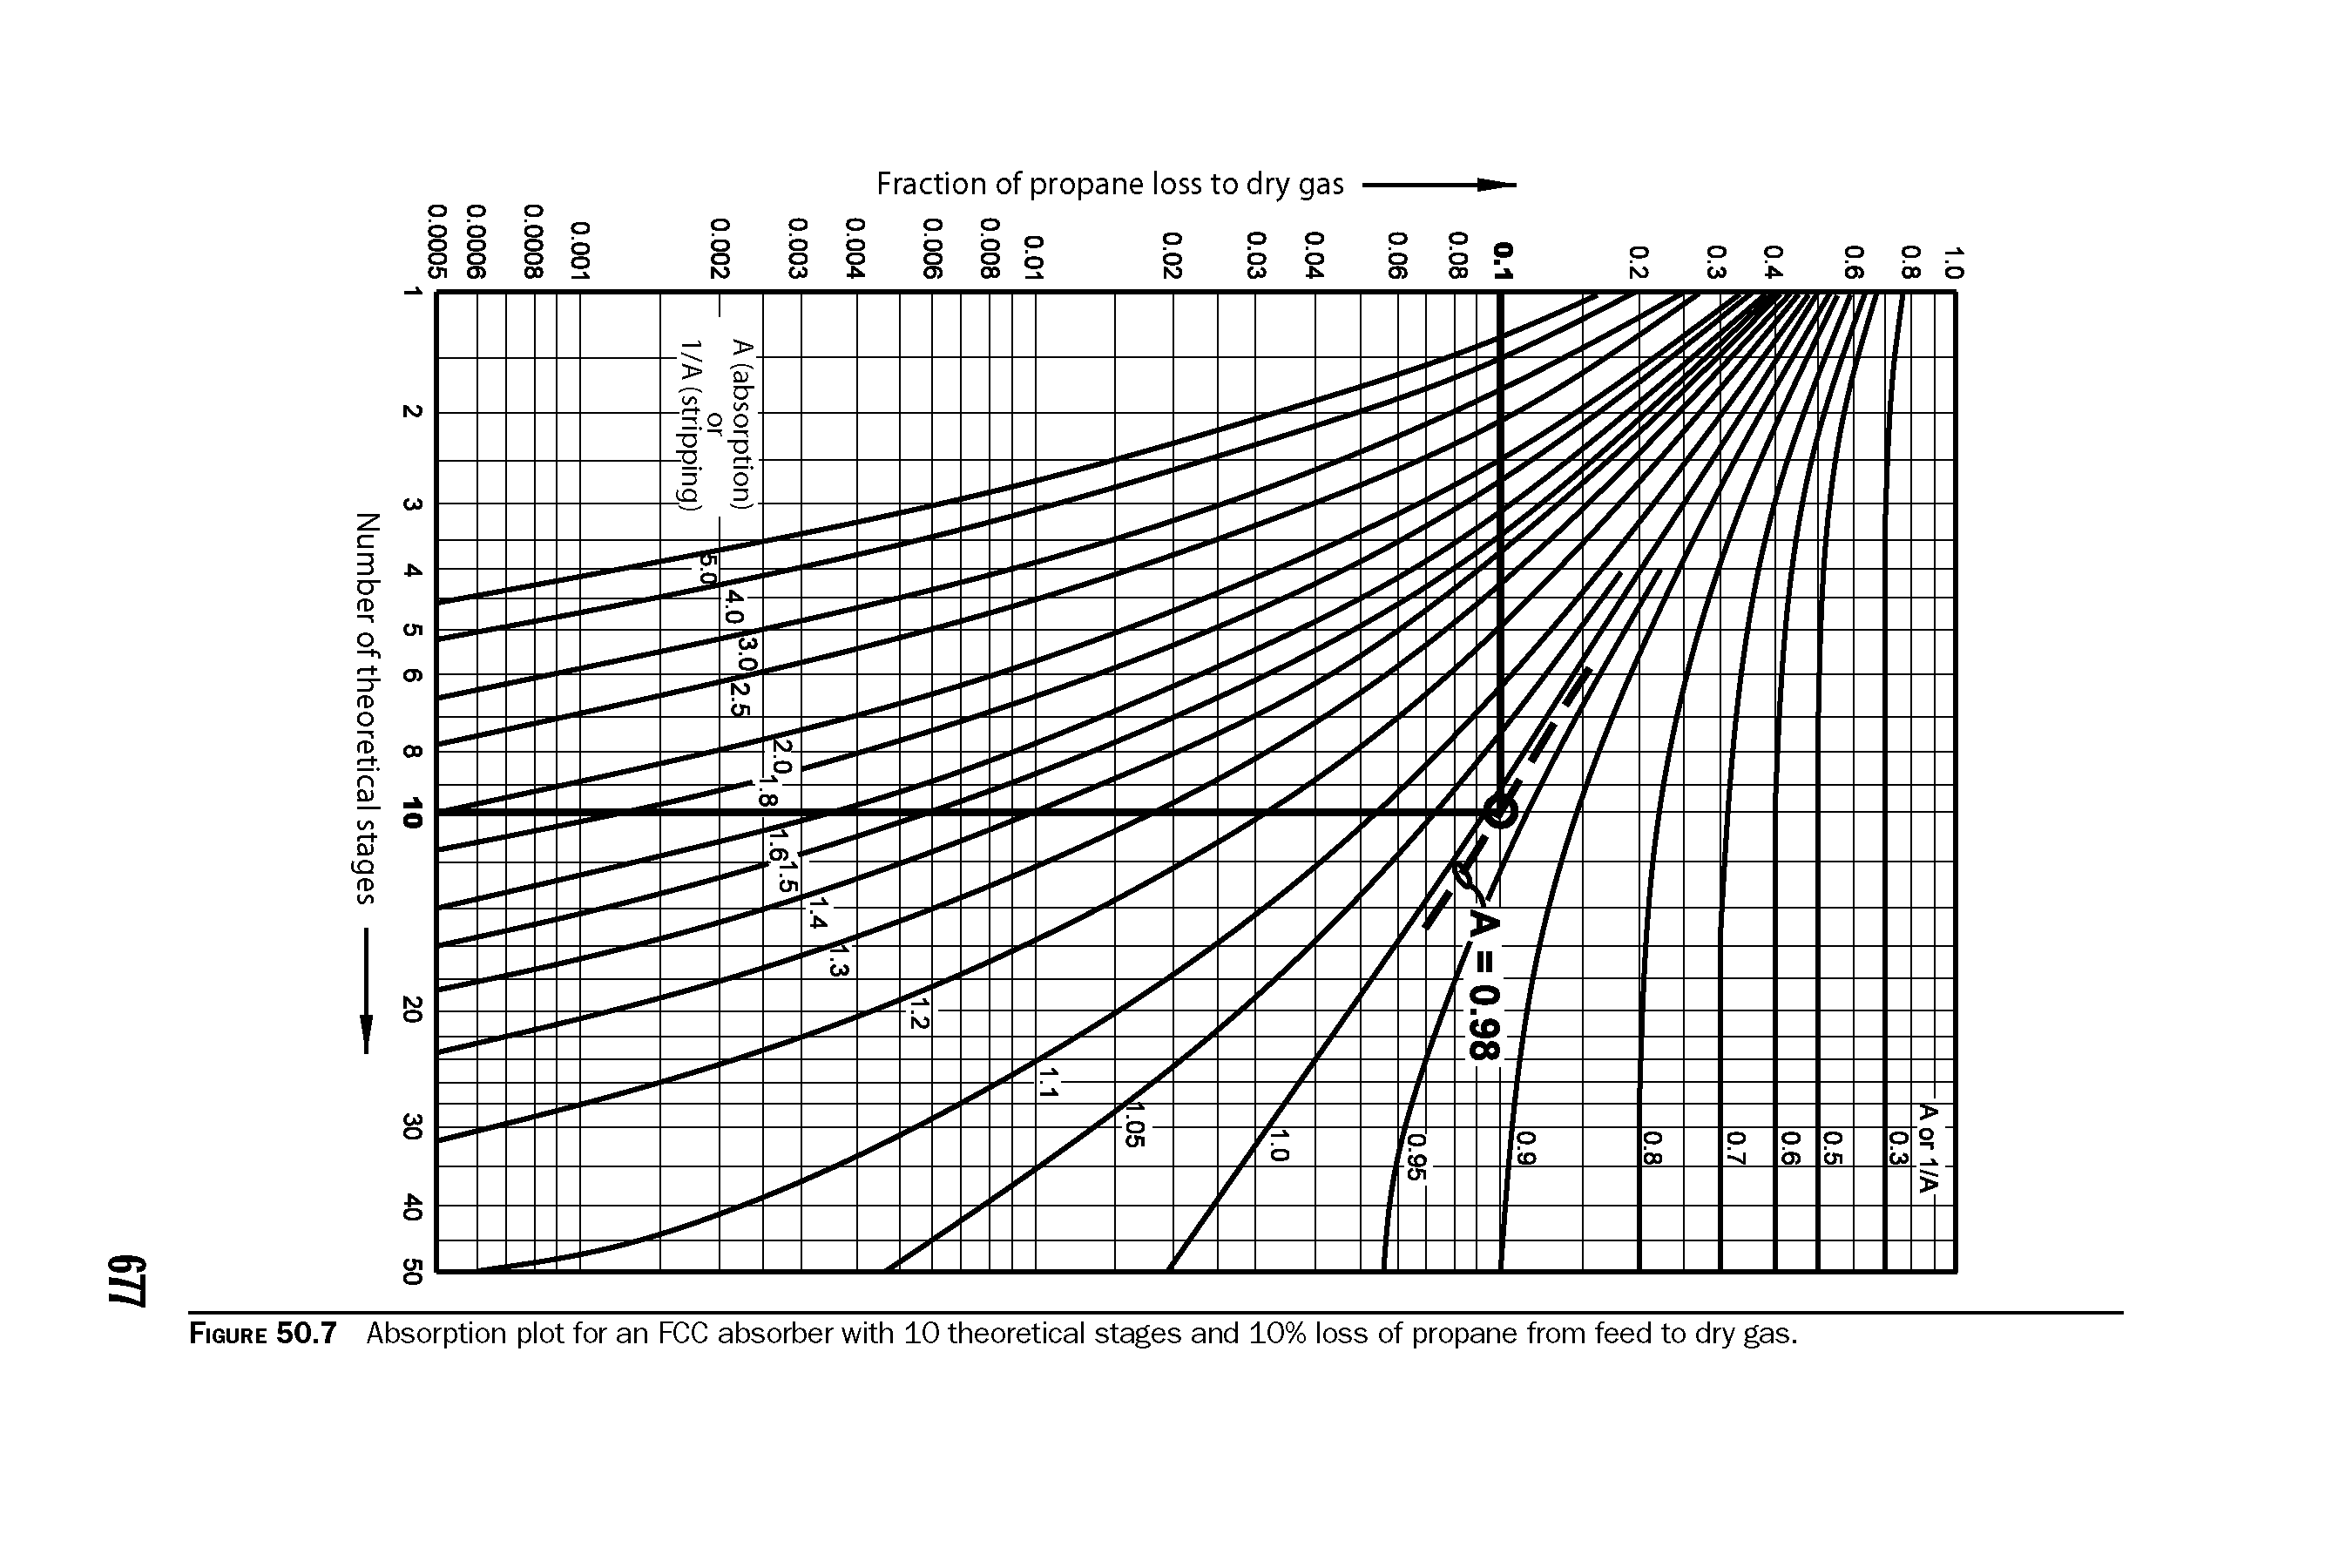 Figure 50.7 Absorption plot for an FCC absorber with 10 theoretical stages and 10% loss of propane from feed to dry gas.